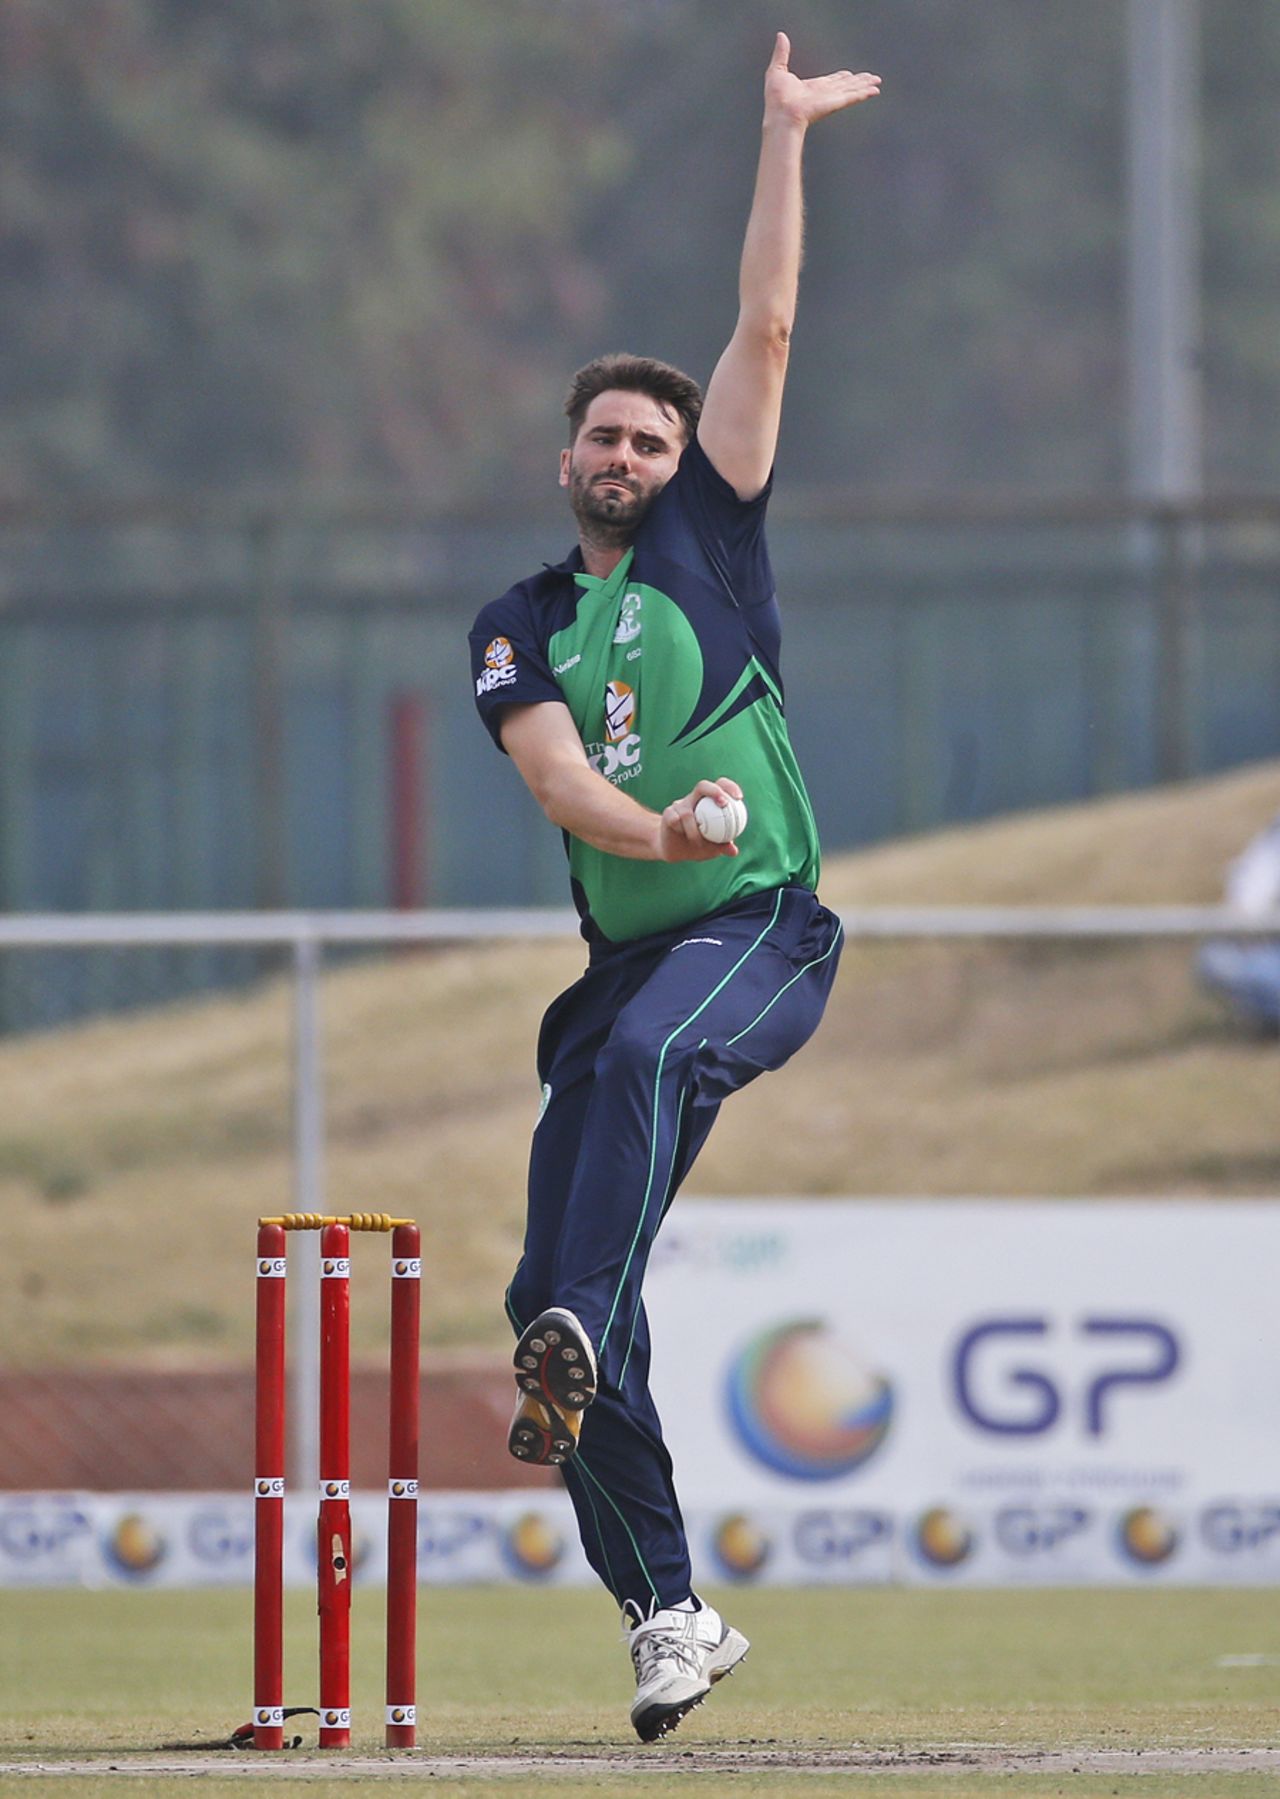 Tim Murtagh in his delivery stride, Afghanistan v Ireland, 3rd ODI, Greater Noida, March 19, 2017